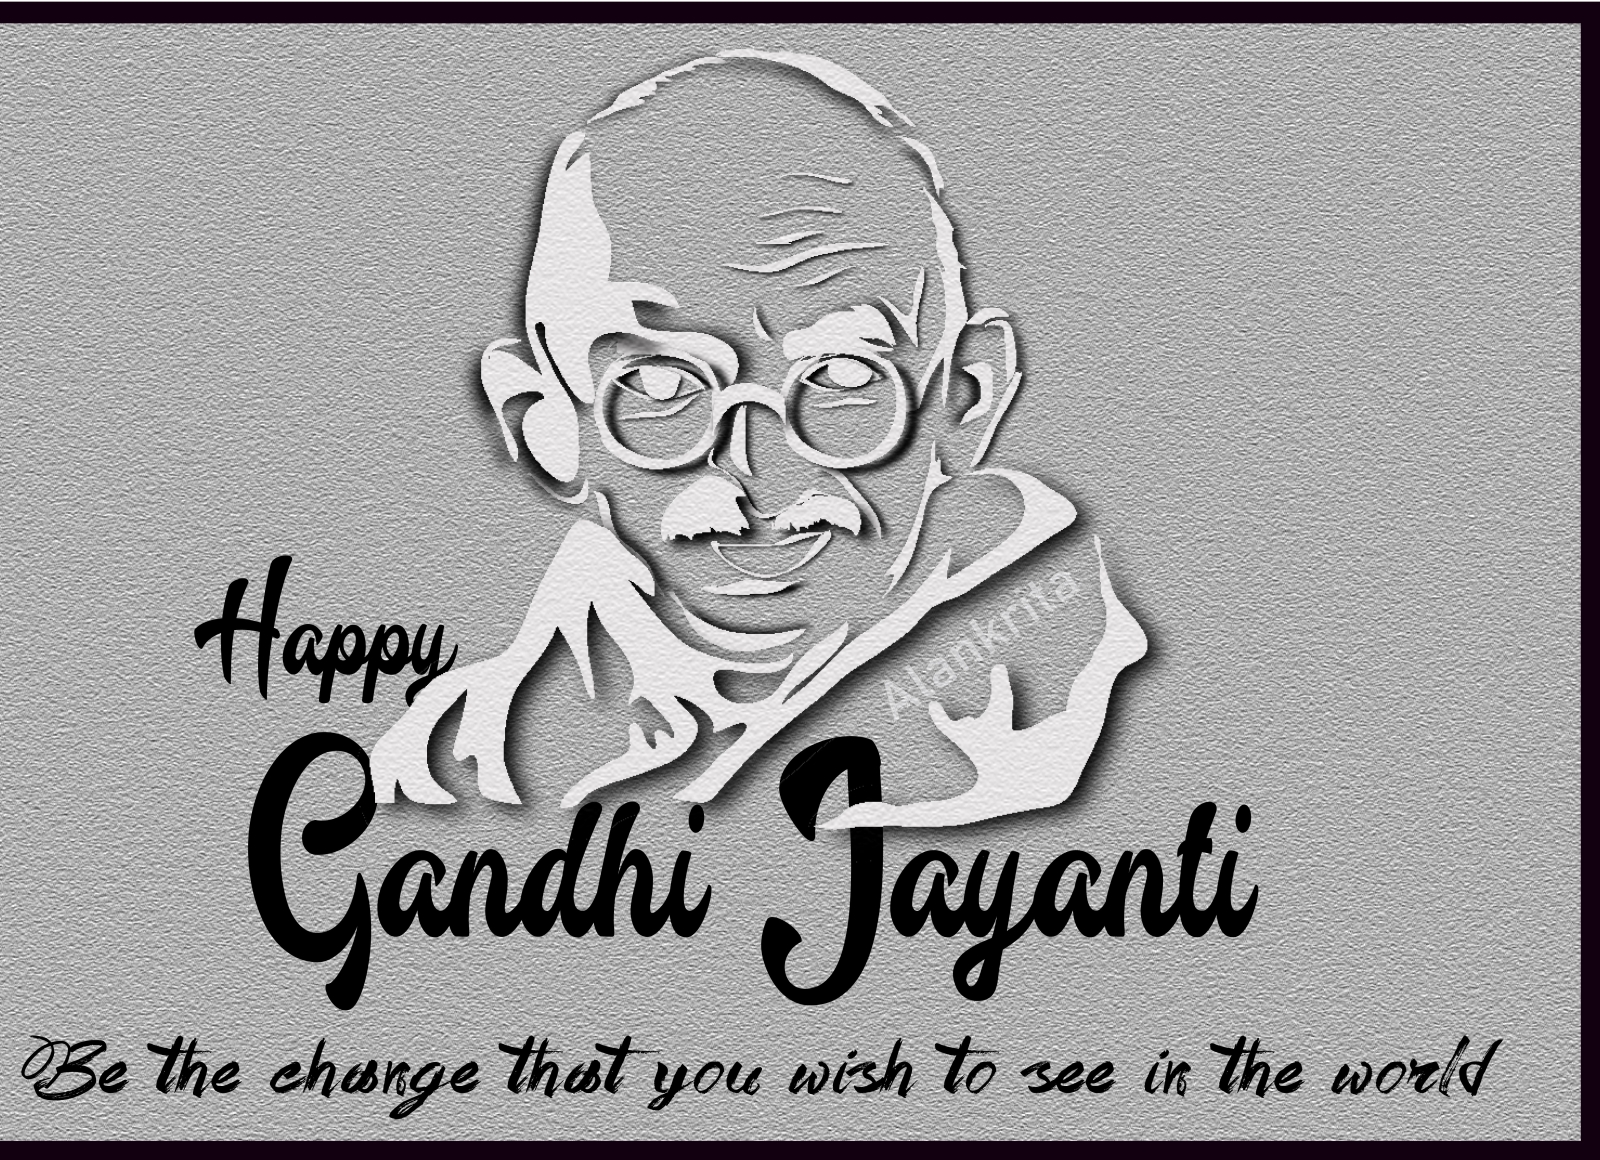 Banner template of the gandhi jayanti wishes